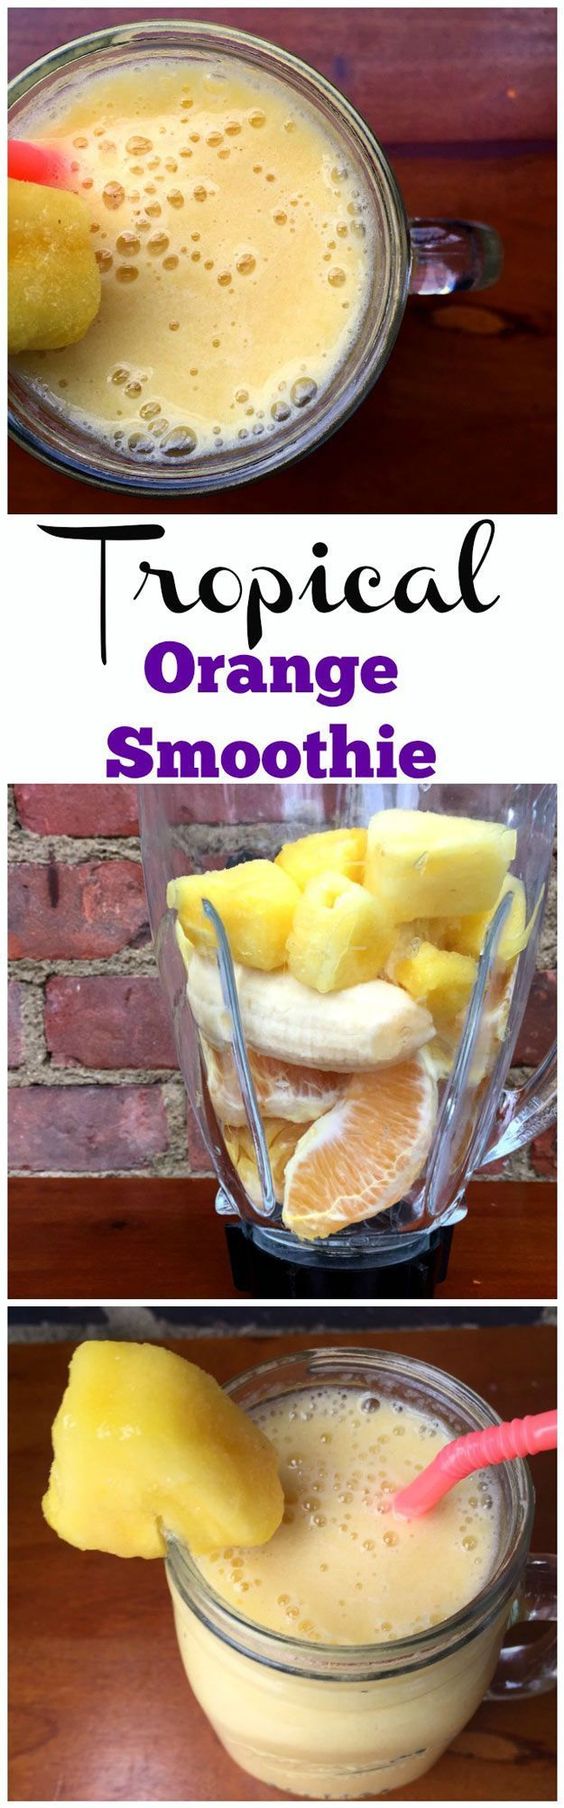 Find balanced breakfast smoothie recipes like this tropical orange smoothie in this article. | healthy smoothies | healthy breakfast smoothies | detox smoothie recipes for weight loss | breakfast smoothies for kids #nutrition #mealprep #diets #weightloss #healthyrecipes #healthyhabits #healthylifestyle #healthylife